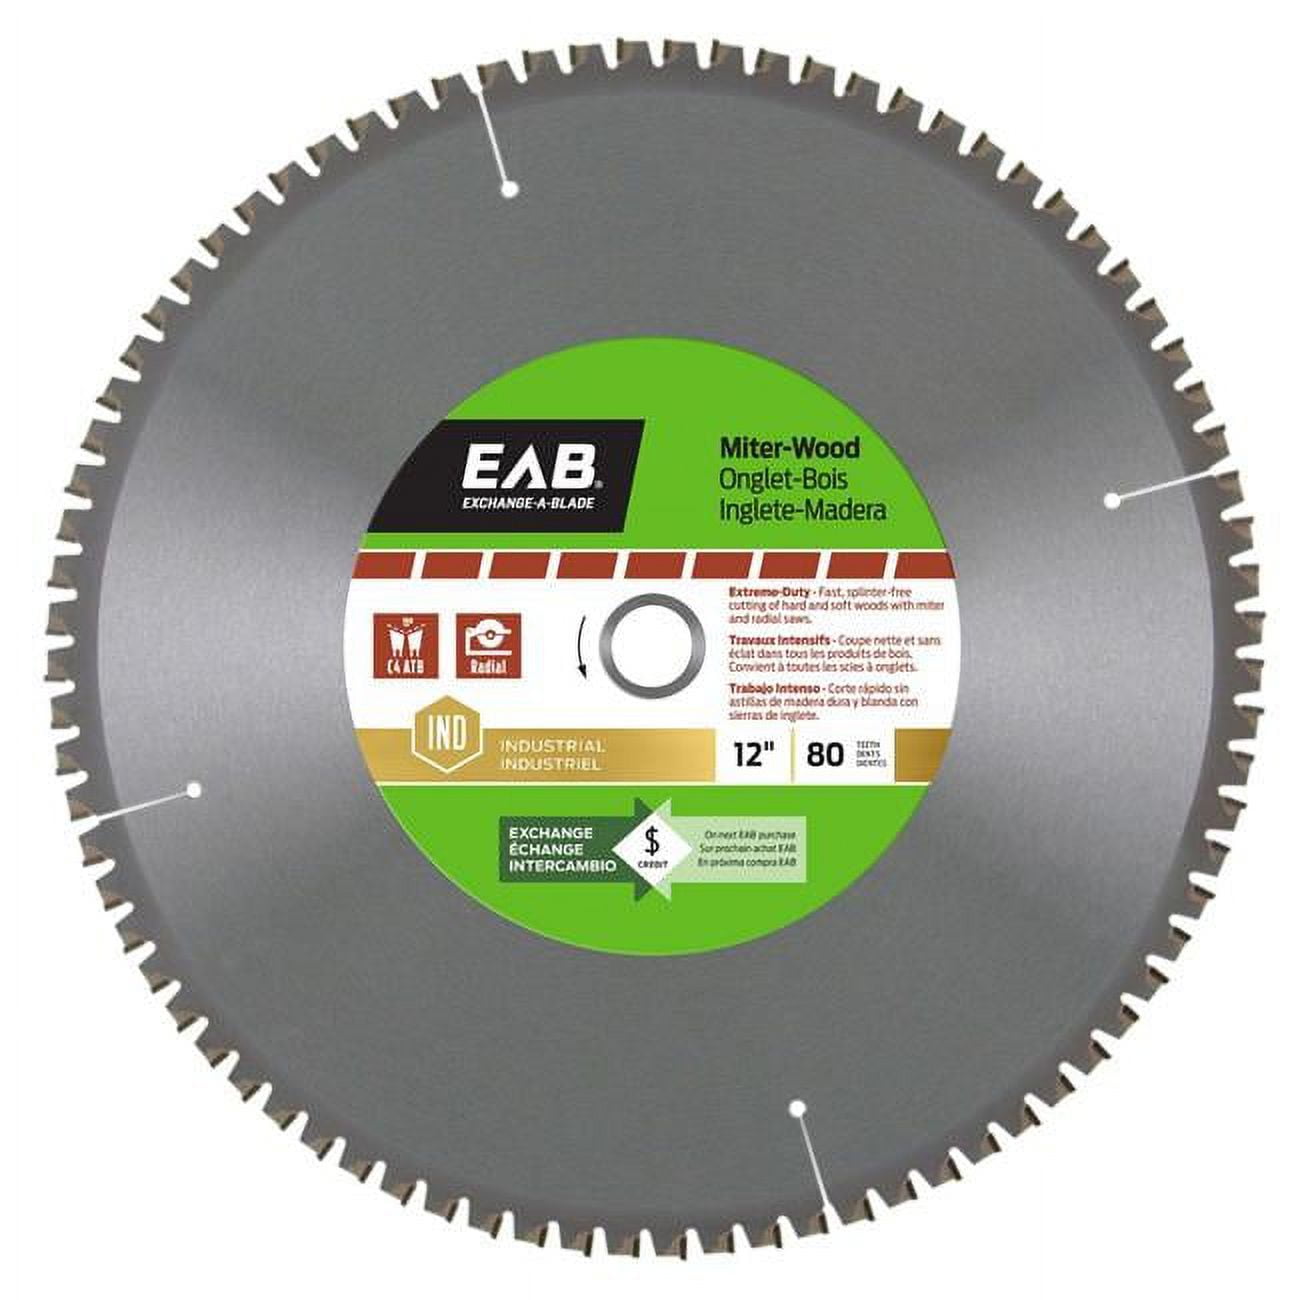 Exchange-A-Blade 1018432